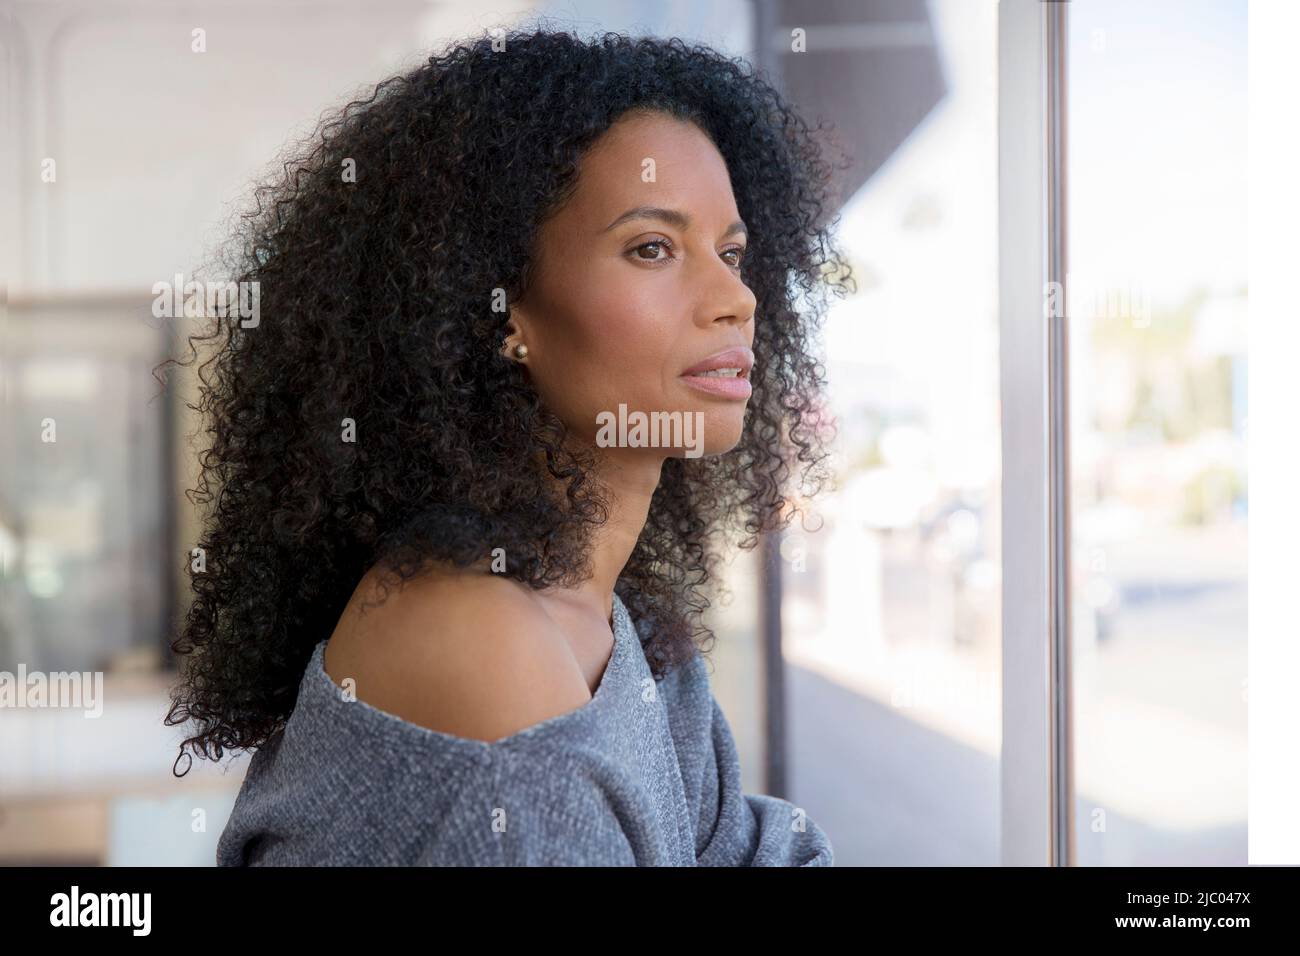 Middle-aged woman gazes thoughtfully out a window. Stock Photo